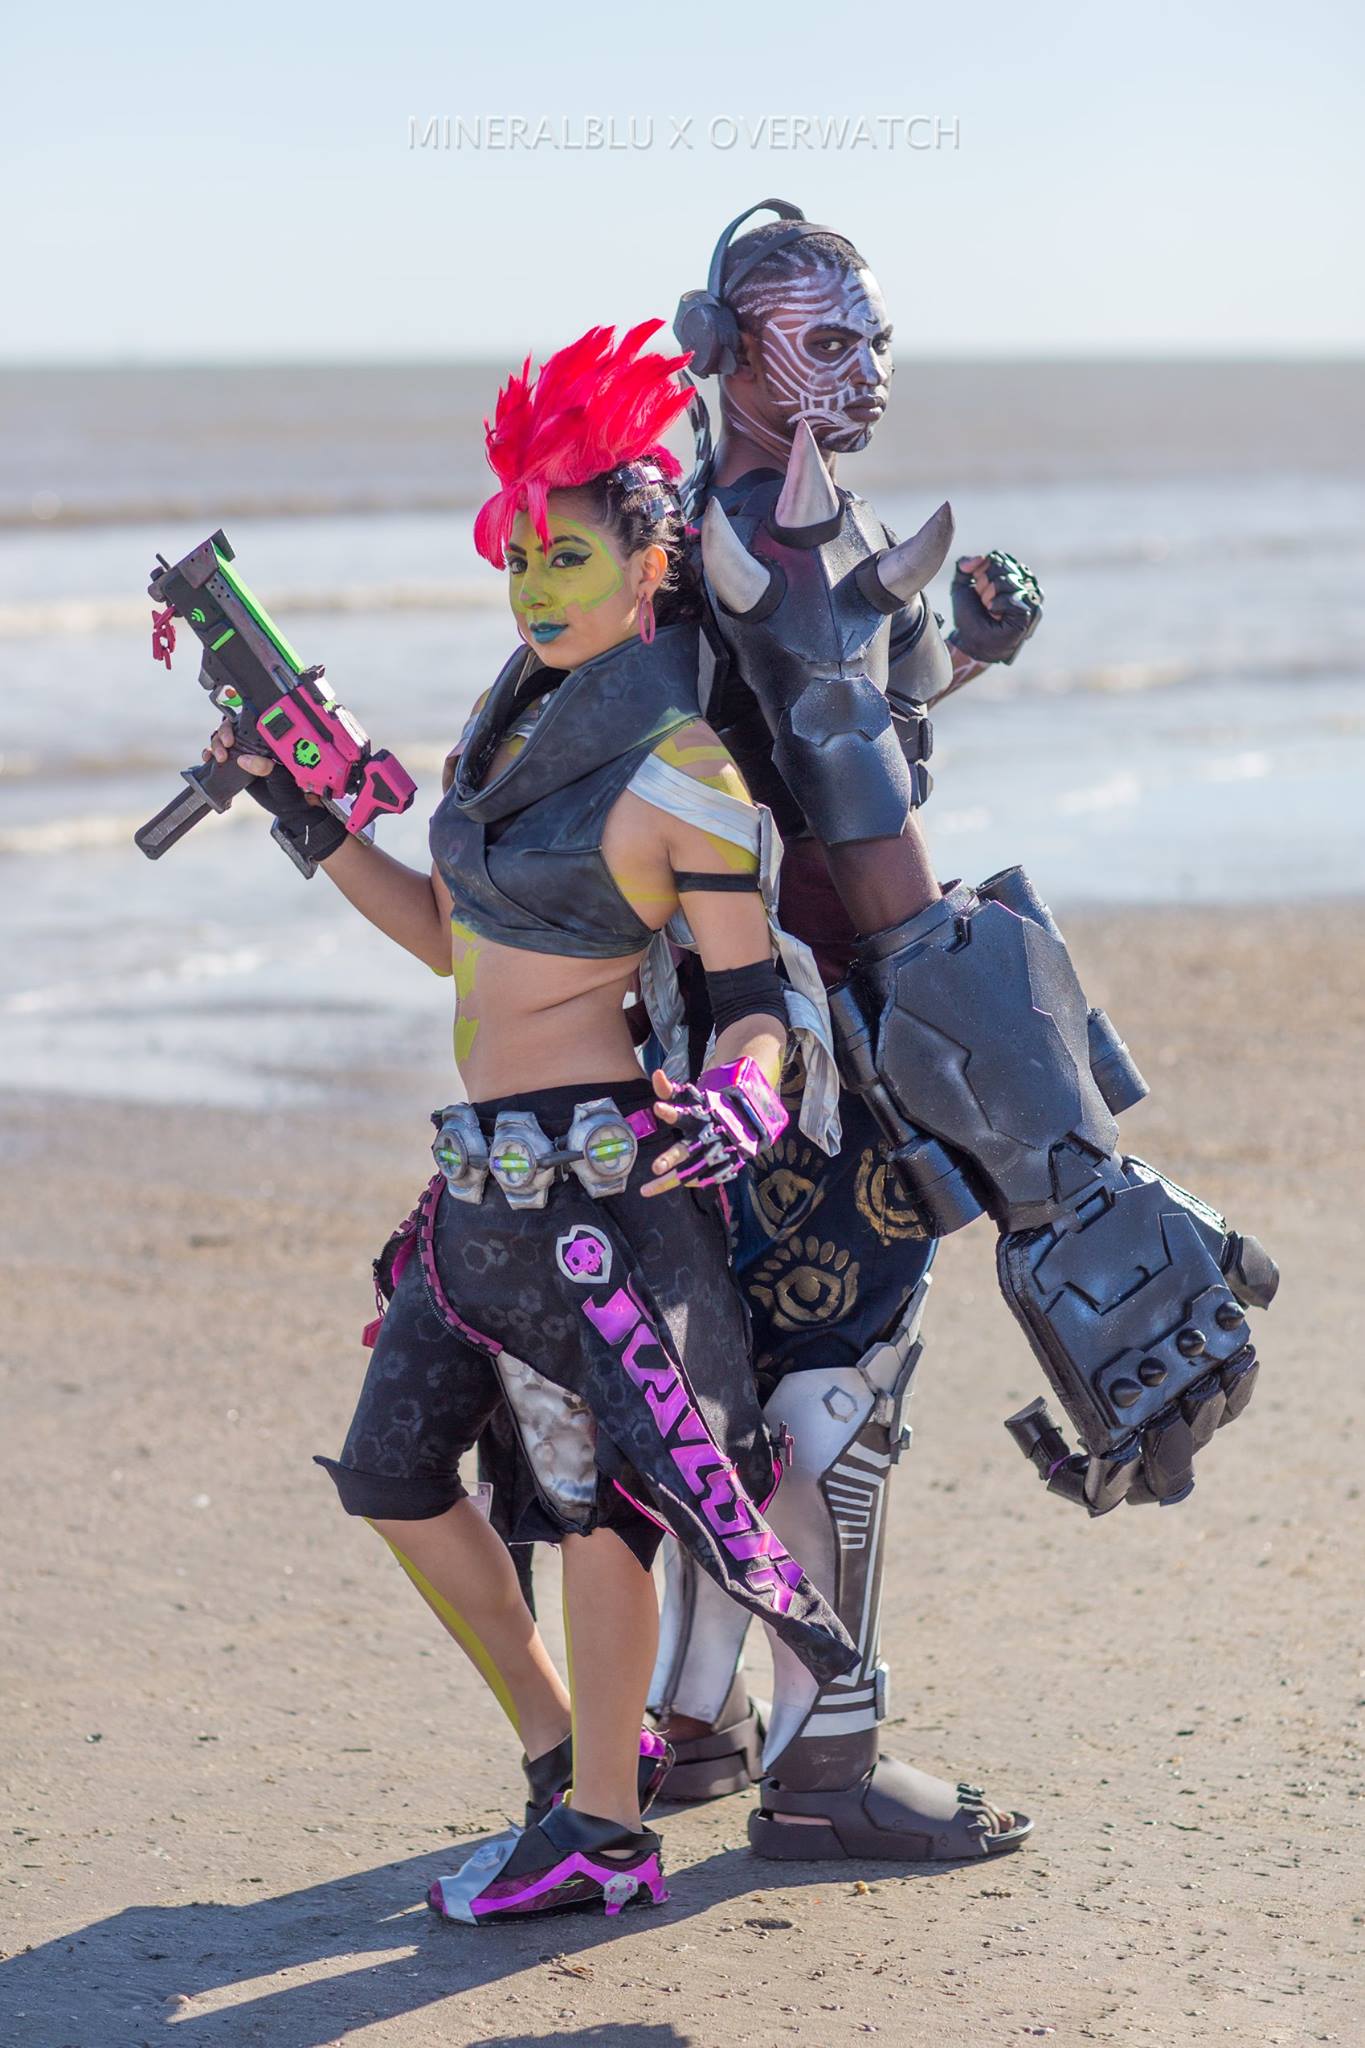 There’s A Cosplay Show Held At The Beach